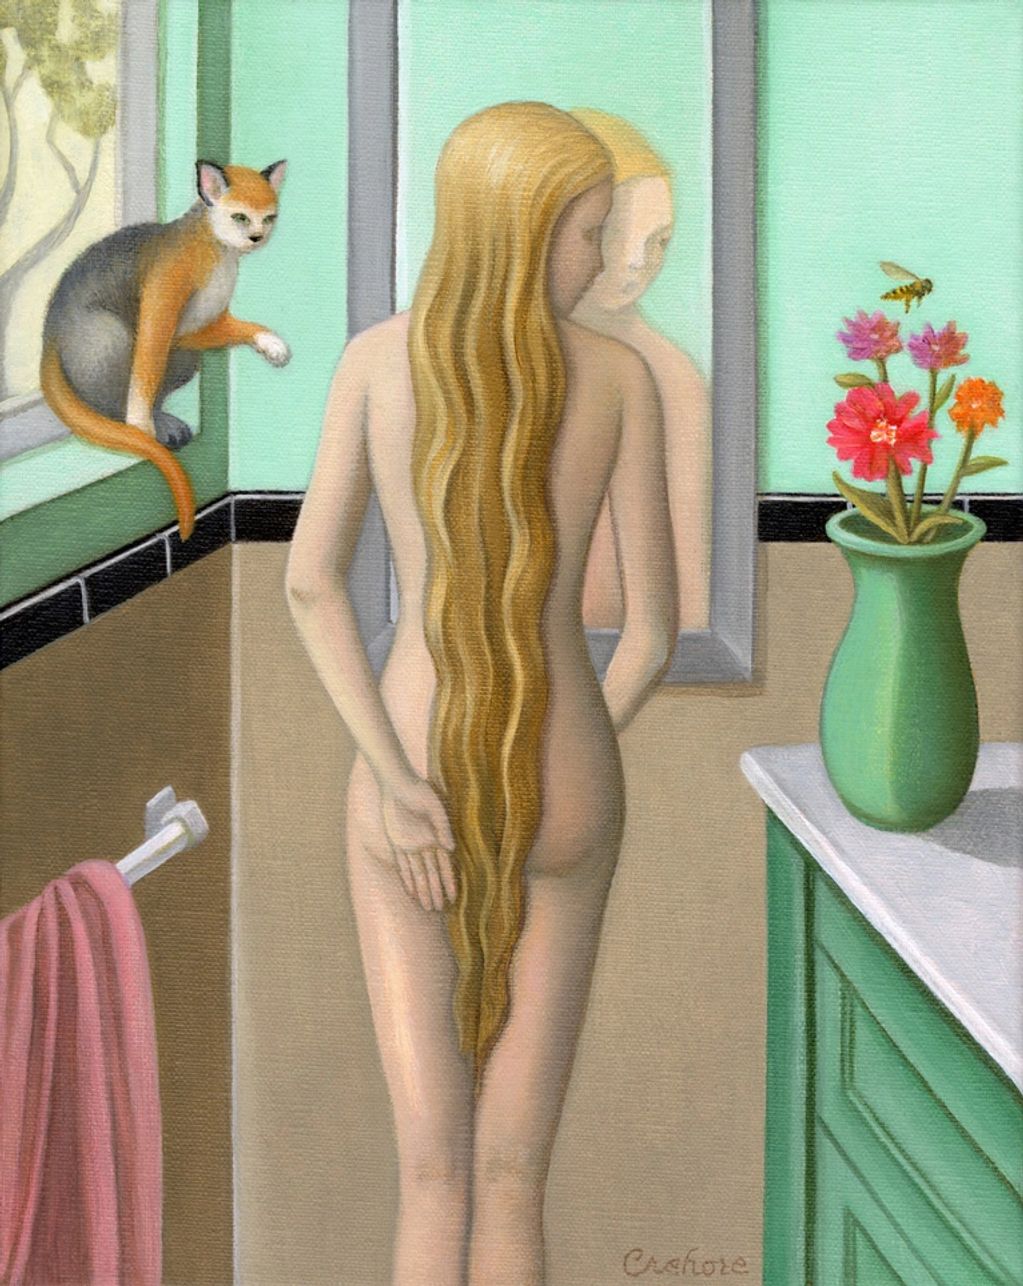 Long haired girl in bathroom with a cat in window, watching a bee flying over a vase of flowers.